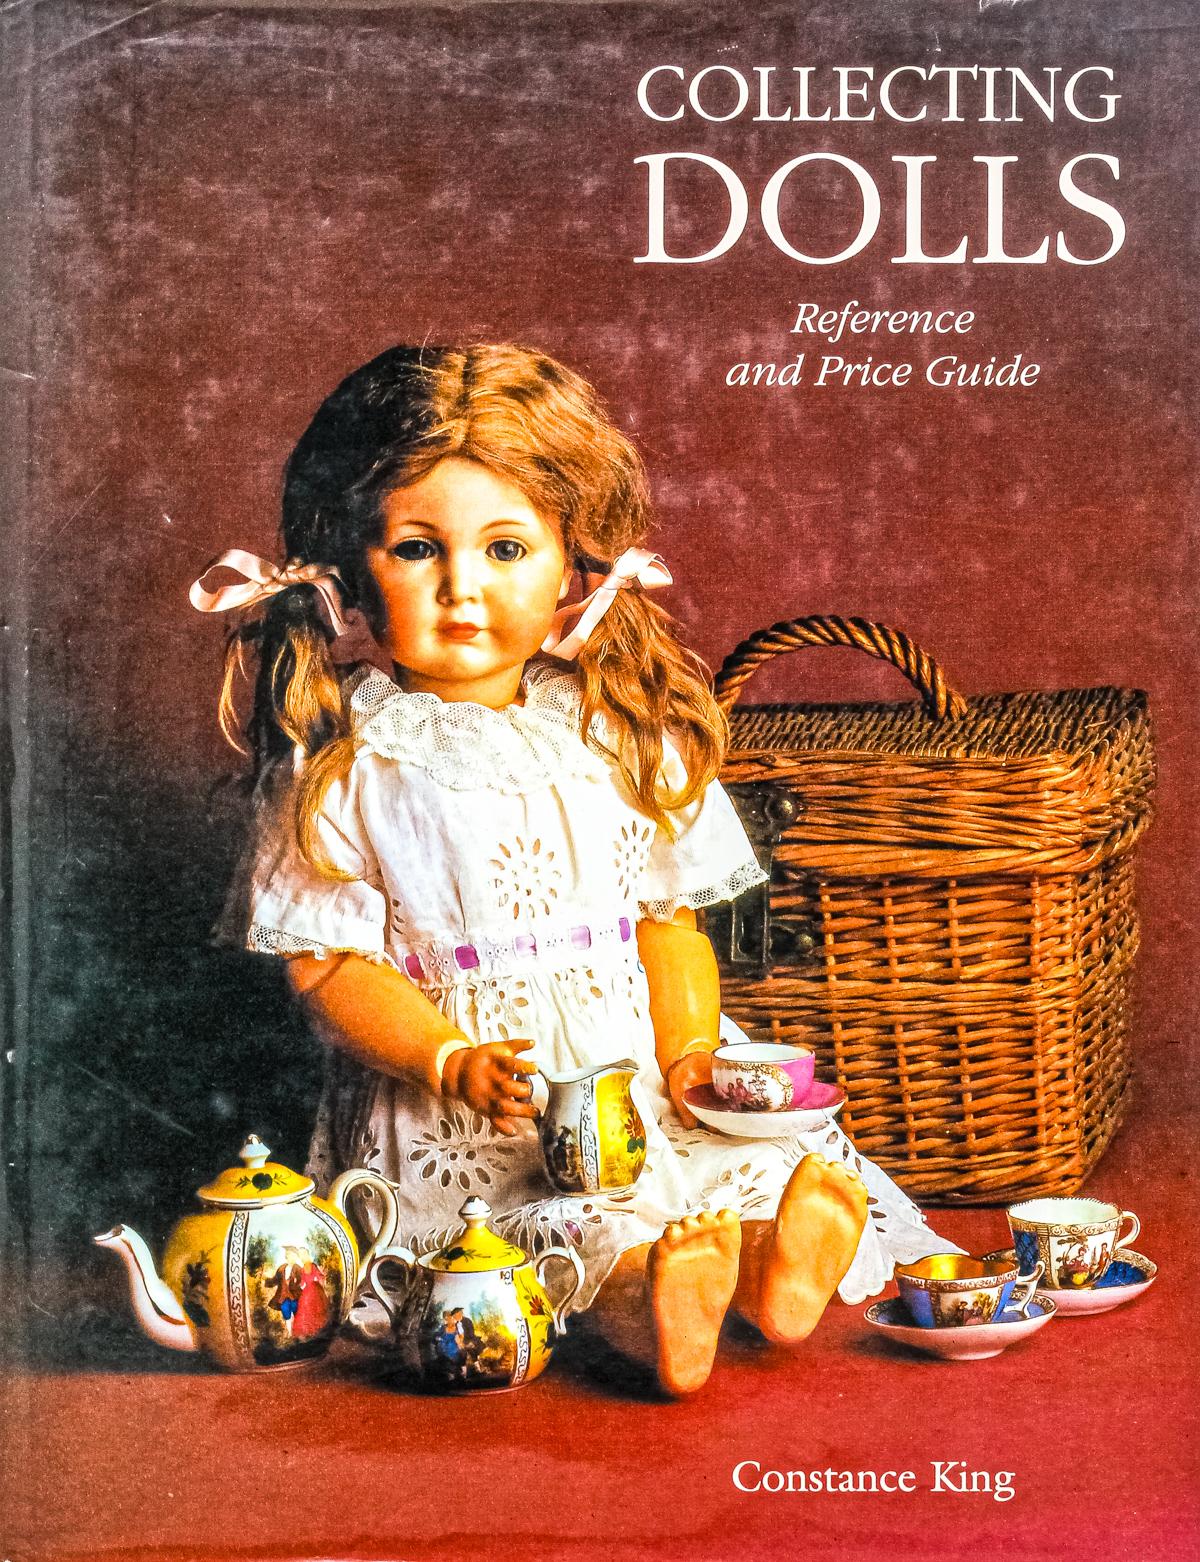 "COLLECTING DOLLS"